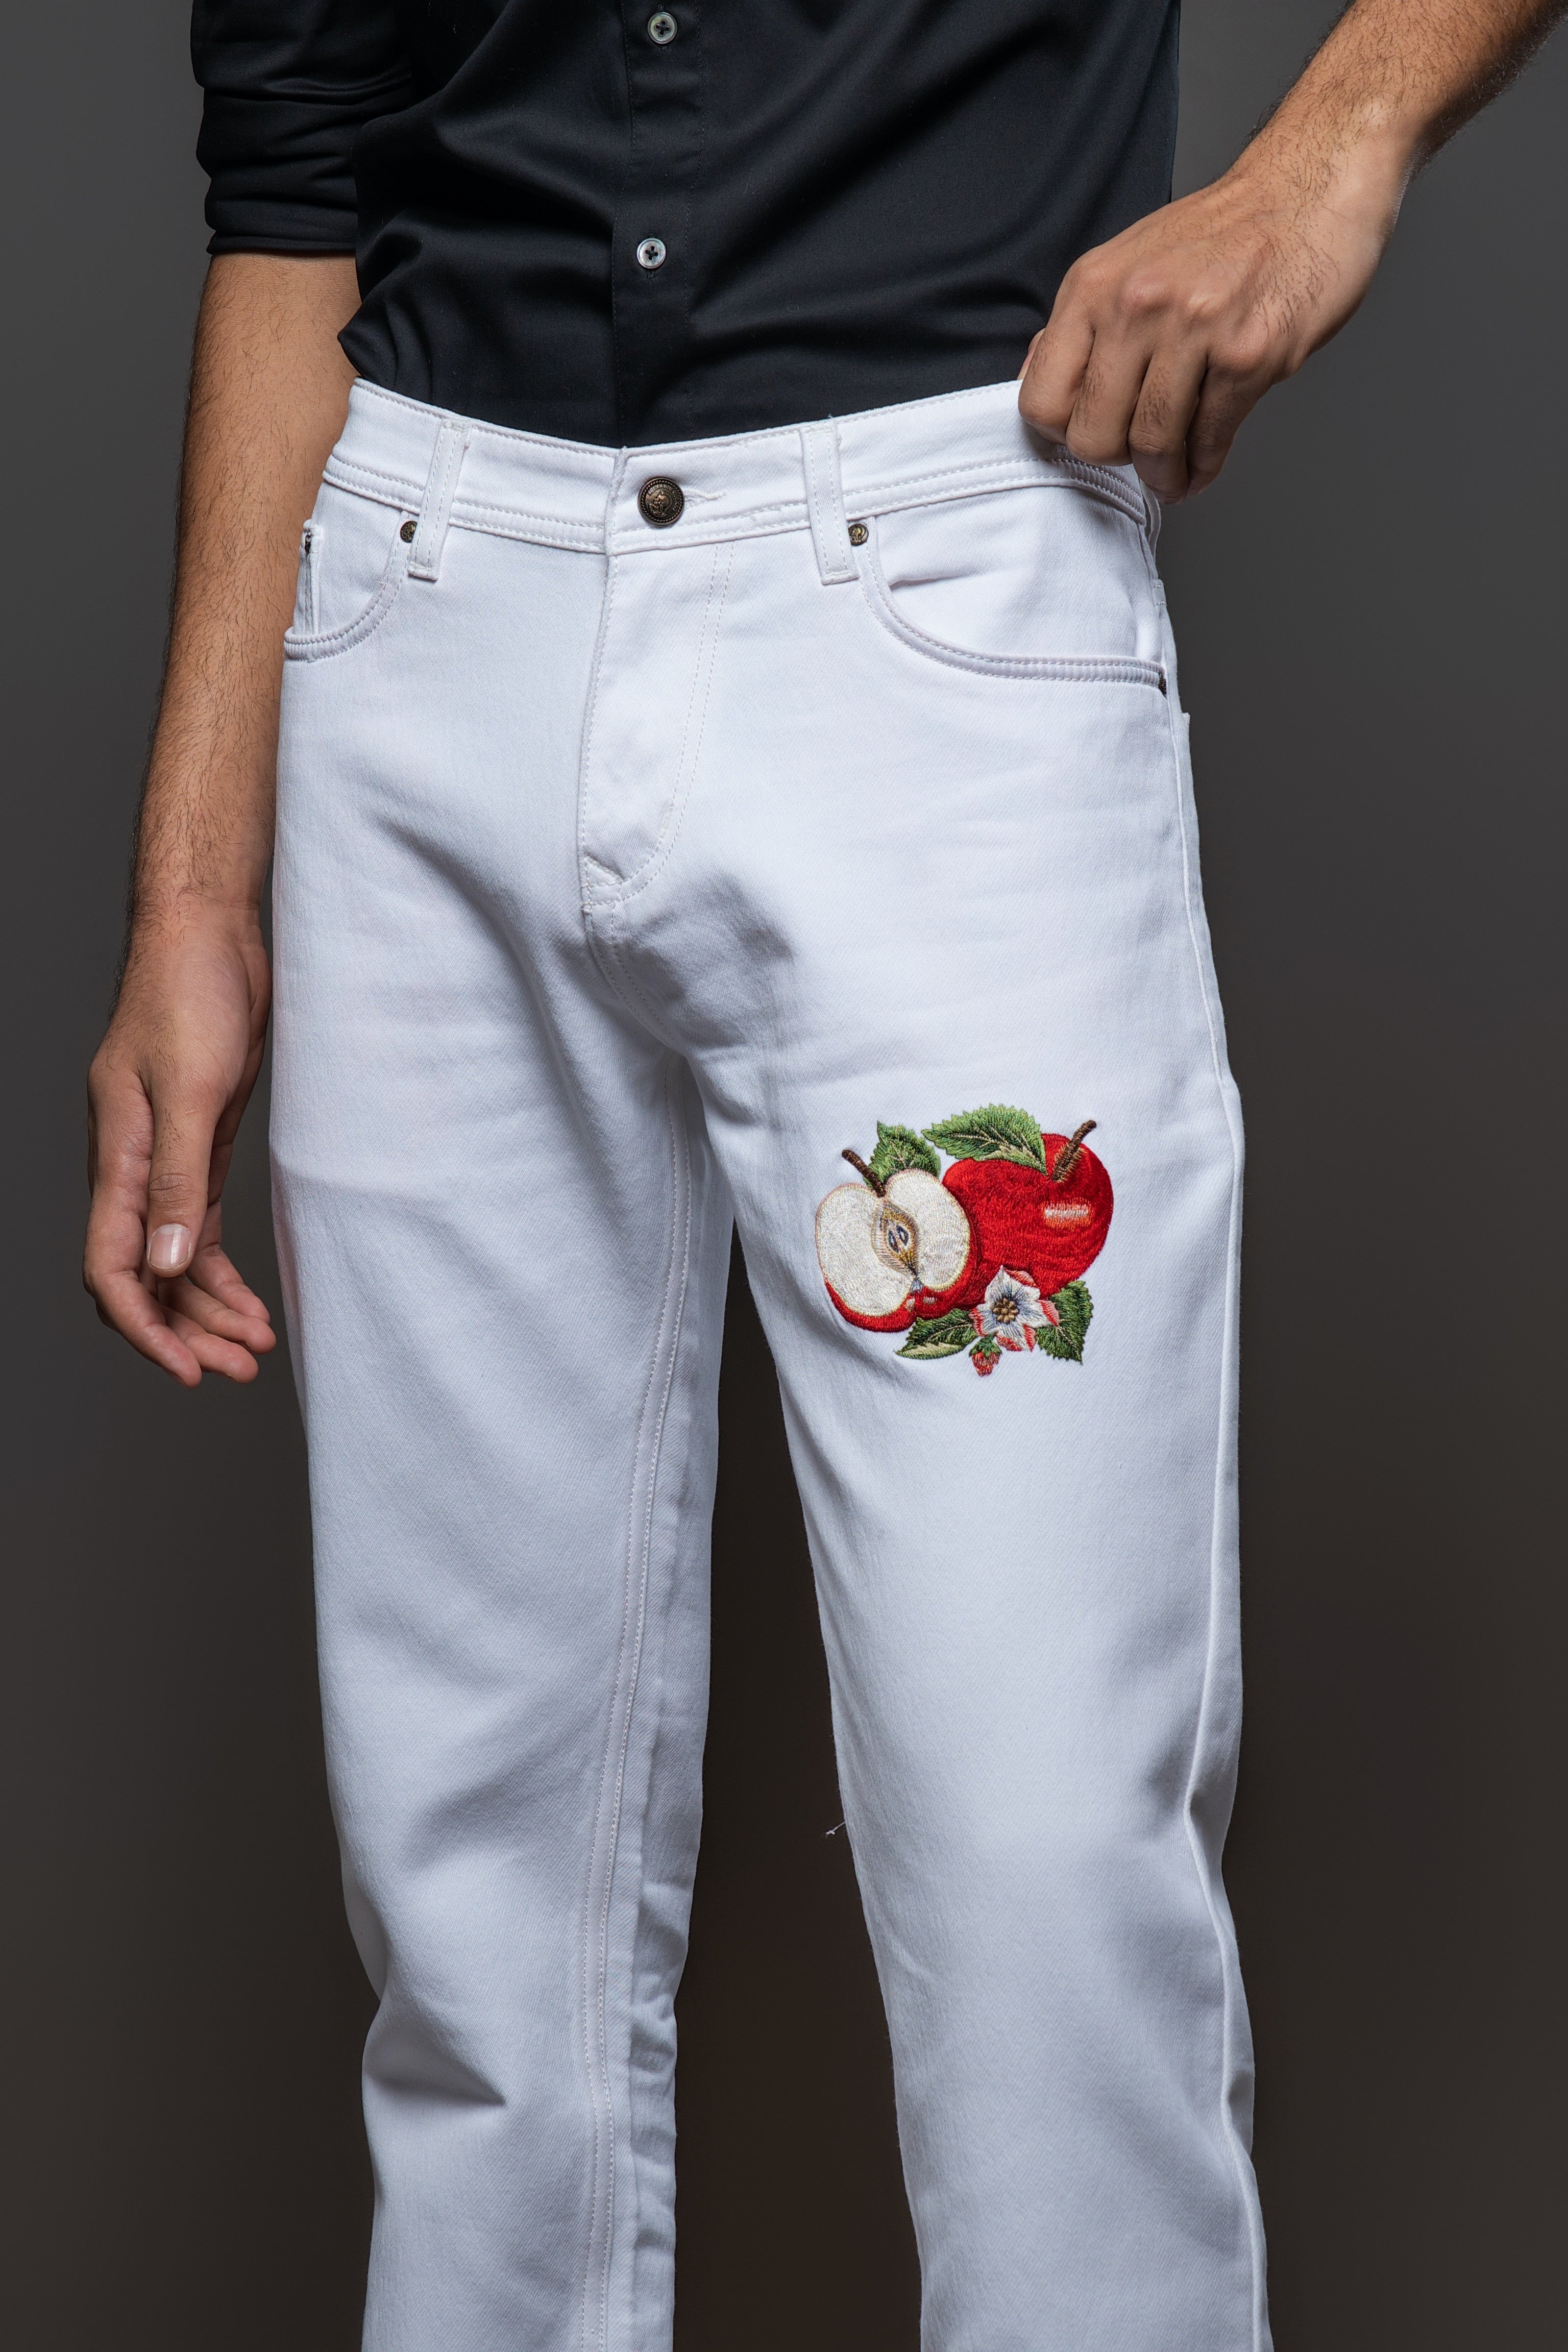 Light Off White Jeans With apple Embroidery